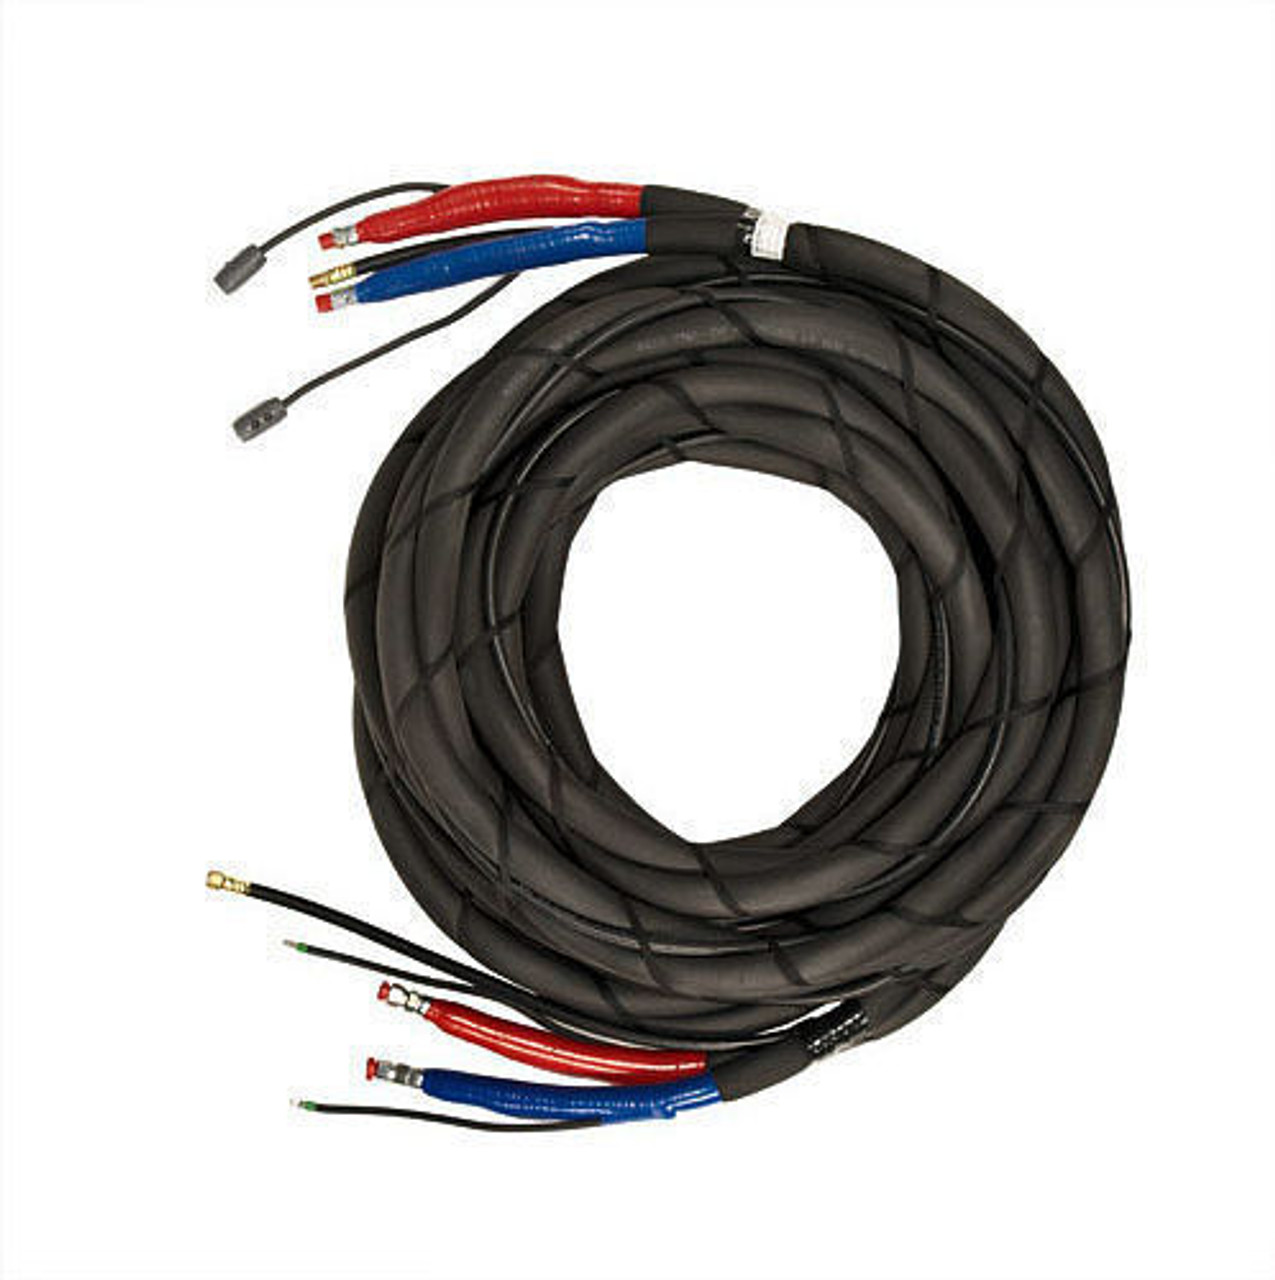 Graco 50' Heated Hoses without Scuffguard